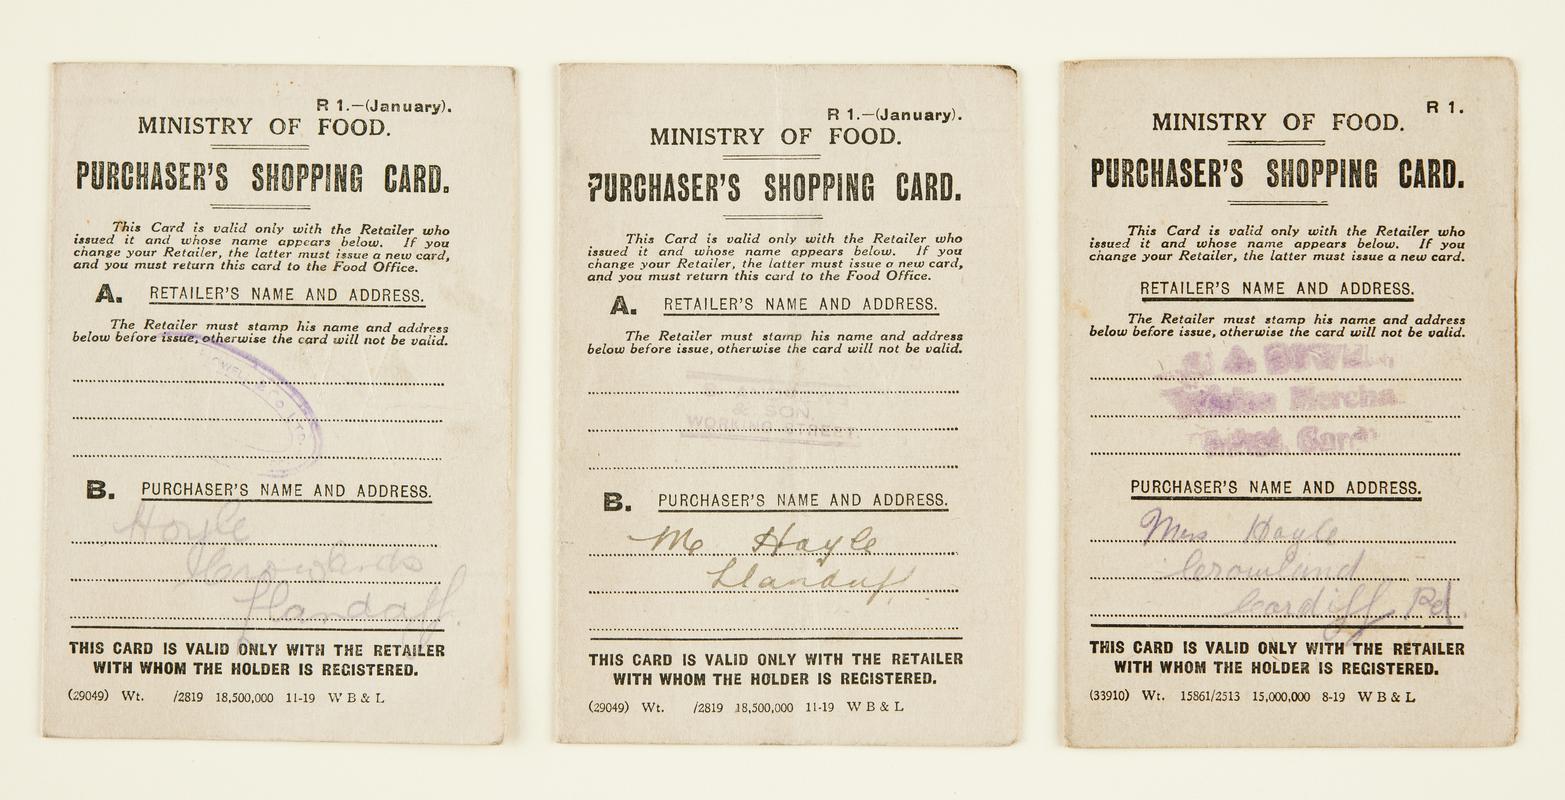 The Purchaser&#039;s Shopping Card